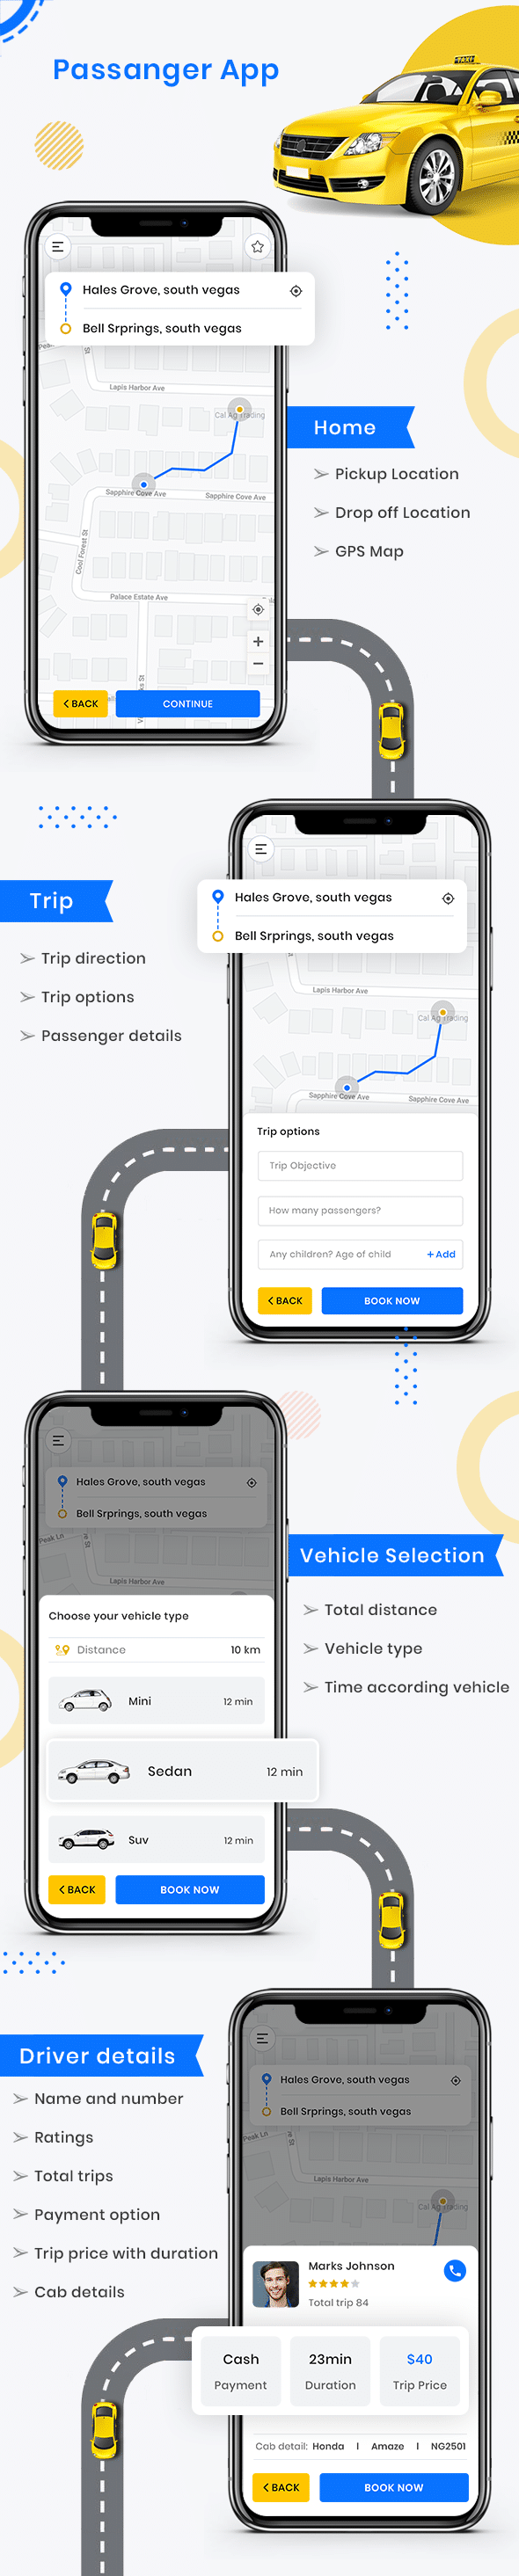 CabME - Flutter Complete Taxi app | Taxi Booking Solution - 7